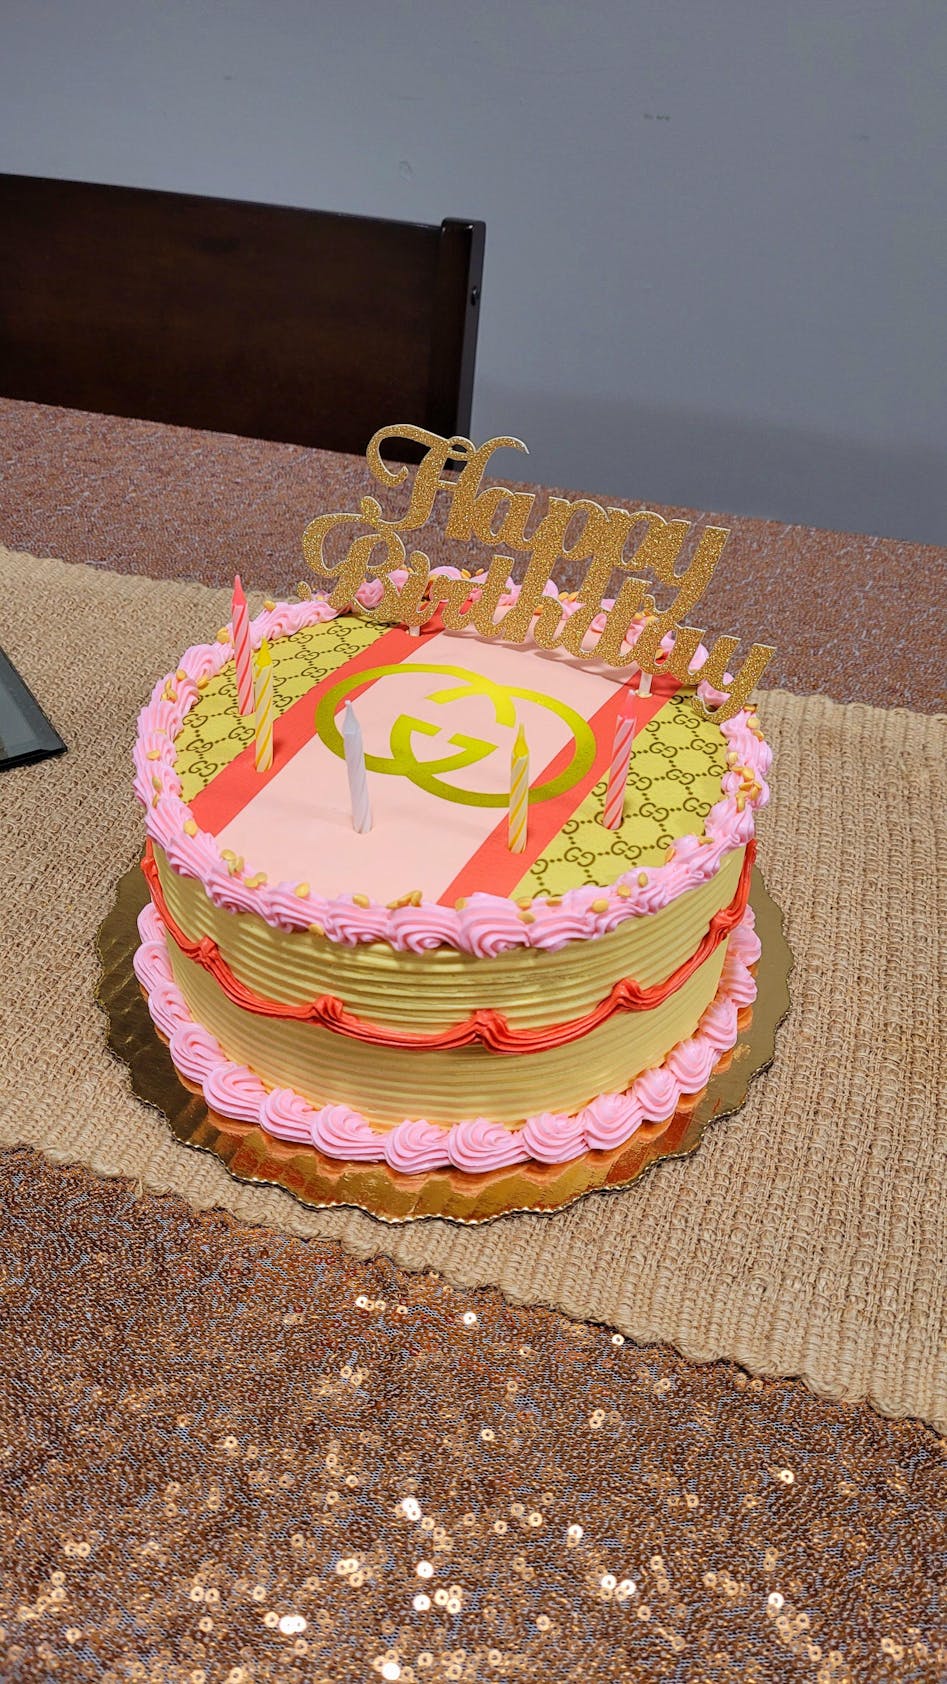 Cake Wrap // Gucci – Edible Cake Toppers